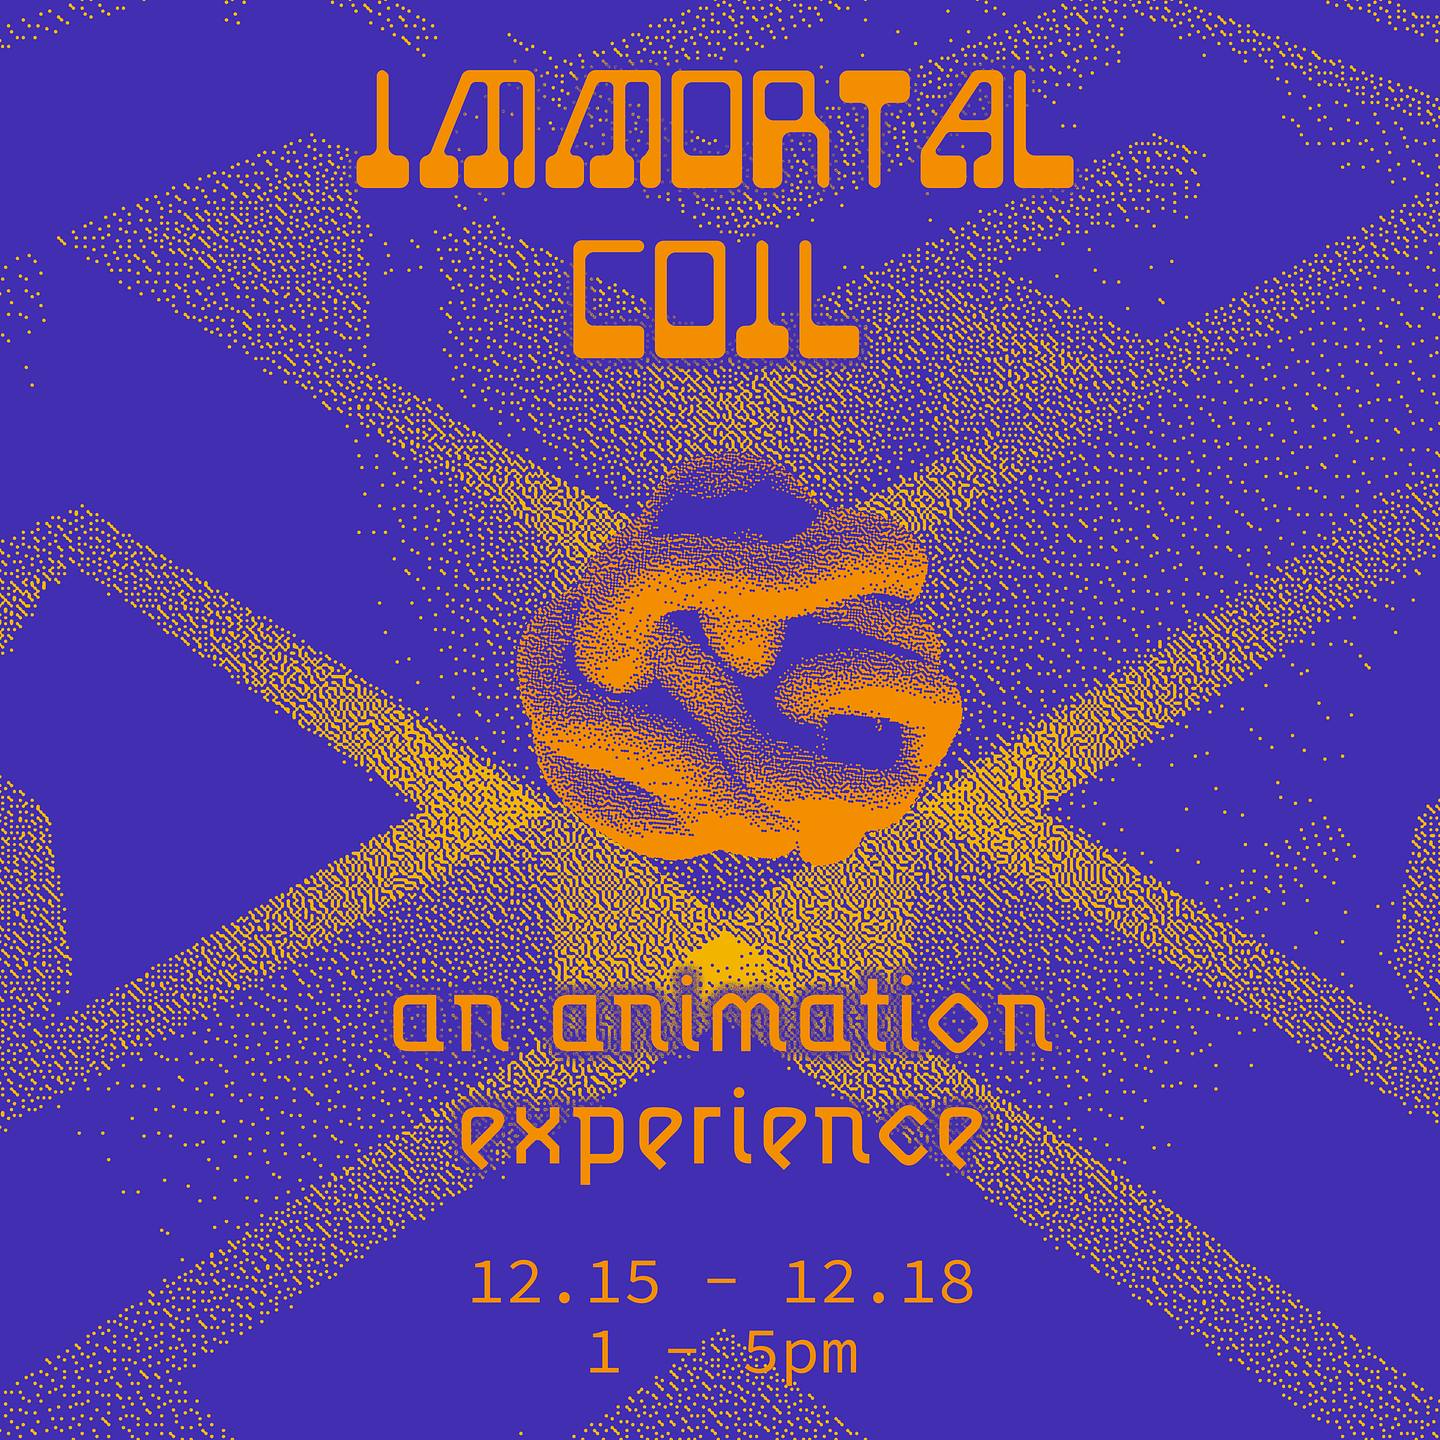 An image of a maze rendered in yellow dots on a purple background. A ball of coiled cylindrical material hovers above the maze in the centre of the image. Text at the top of the image reads "IMMORTAL COIL” and, at the bottom, “an animation experience”, “12.15 – 12.18 1 – 5pm”